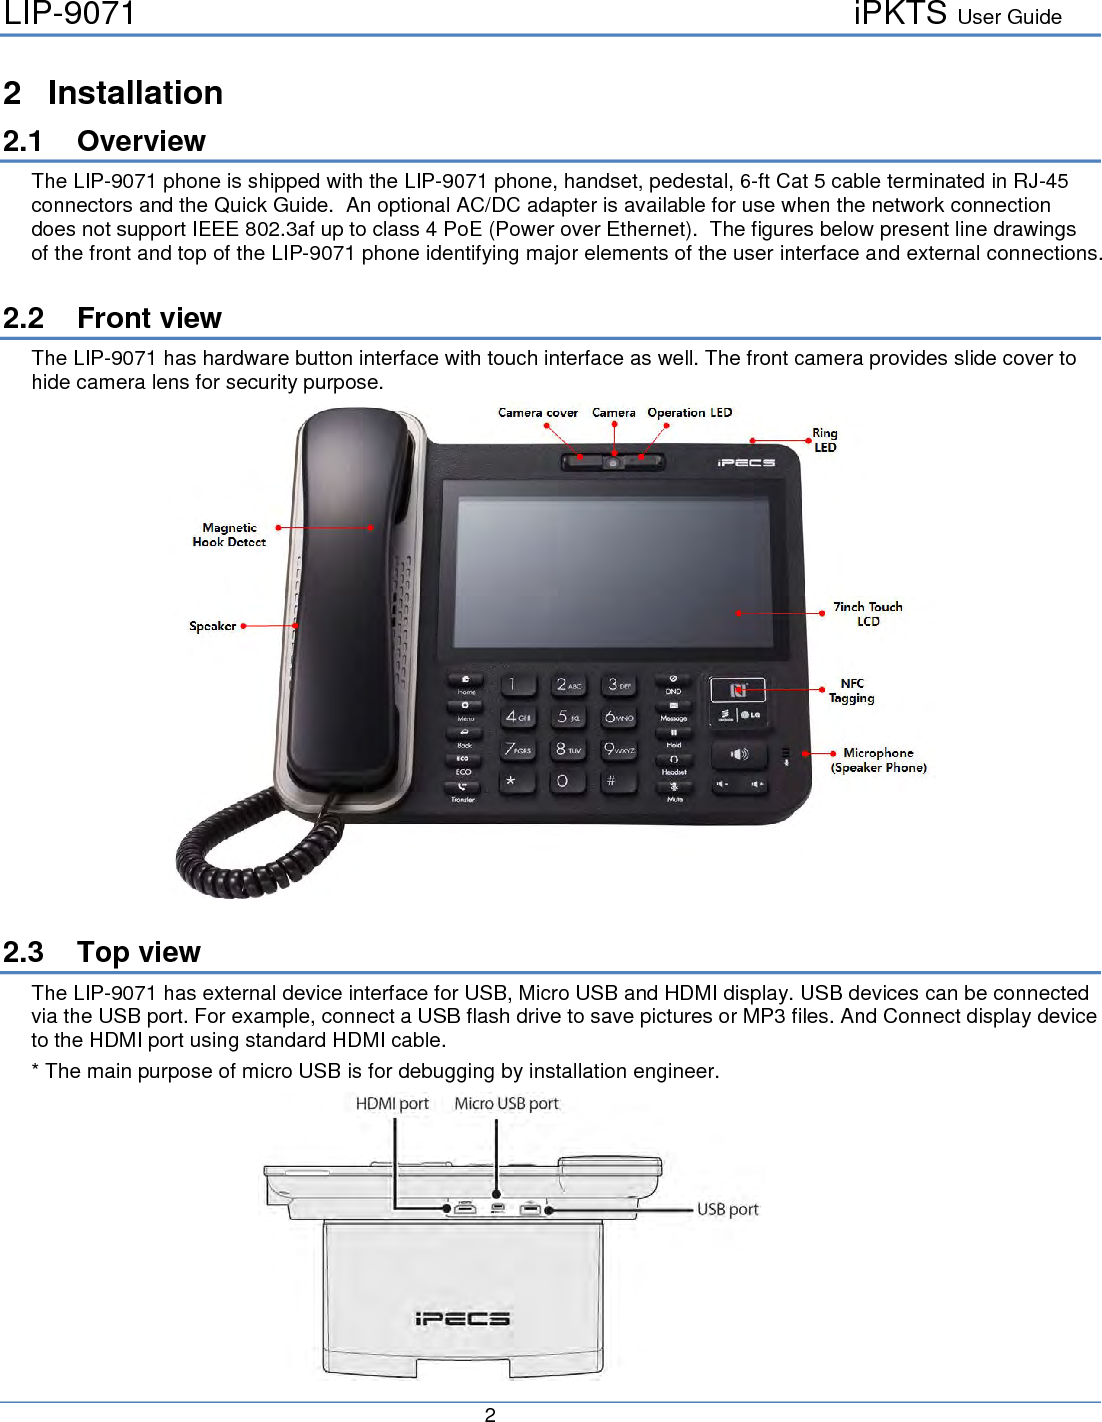 LIP-9071     iPKTS User Guide      2   2  Installation 2.1 Overview The LIP-9071 phone is shipped with the LIP-9071 phone, handset, pedestal, 6-ft Cat 5 cable terminated in RJ-45 connectors and the Quick Guide.  An optional AC/DC adapter is available for use when the network connection does not support IEEE 802.3af up to class 4 PoE (Power over Ethernet).  The figures below present line drawings of the front and top of the LIP-9071 phone identifying major elements of the user interface and external connections.  2.2 Front view The LIP-9071 has hardware button interface with touch interface as well. The front camera provides slide cover to hide camera lens for security purpose.   2.3 Top view The LIP-9071 has external device interface for USB, Micro USB and HDMI display. USB devices can be connected via the USB port. For example, connect a USB flash drive to save pictures or MP3 files. And Connect display device to the HDMI port using standard HDMI cable.  * The main purpose of micro USB is for debugging by installation engineer.            